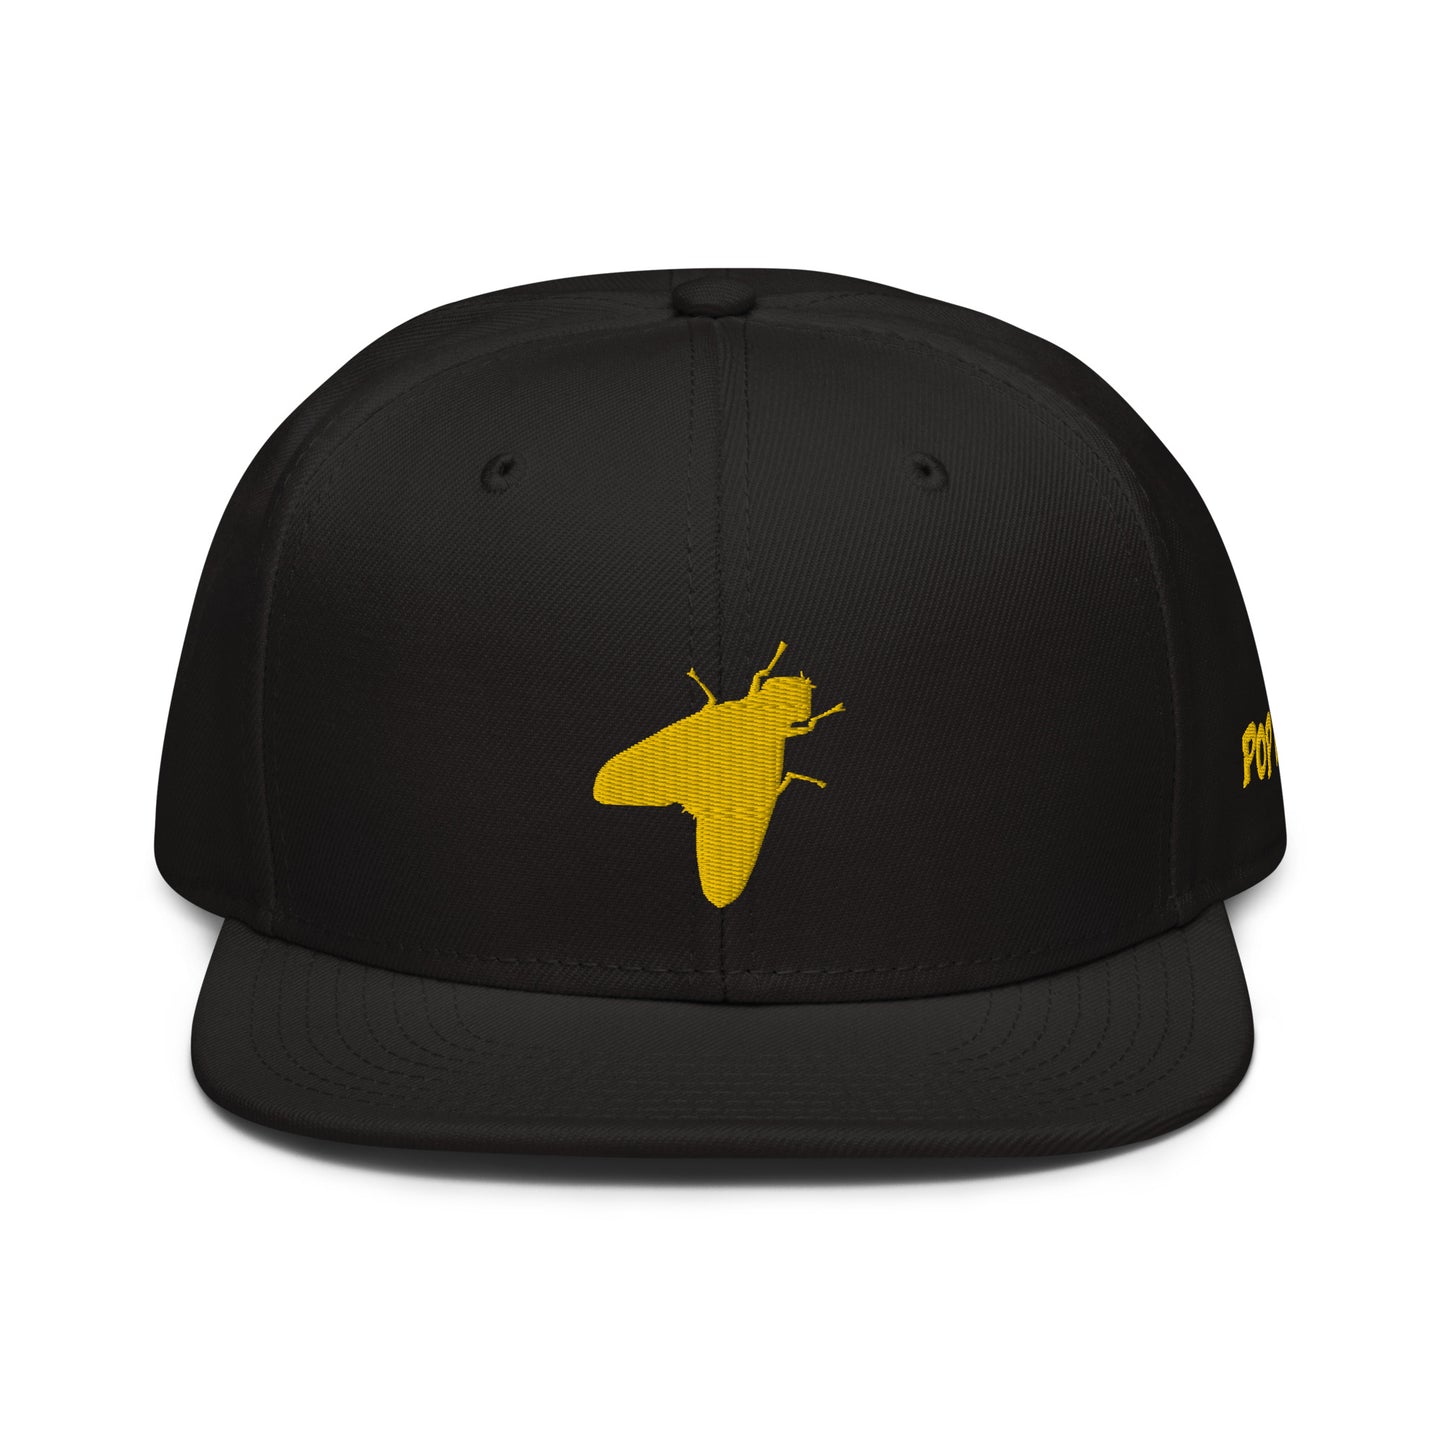 The Burgh Pop Fly Hat